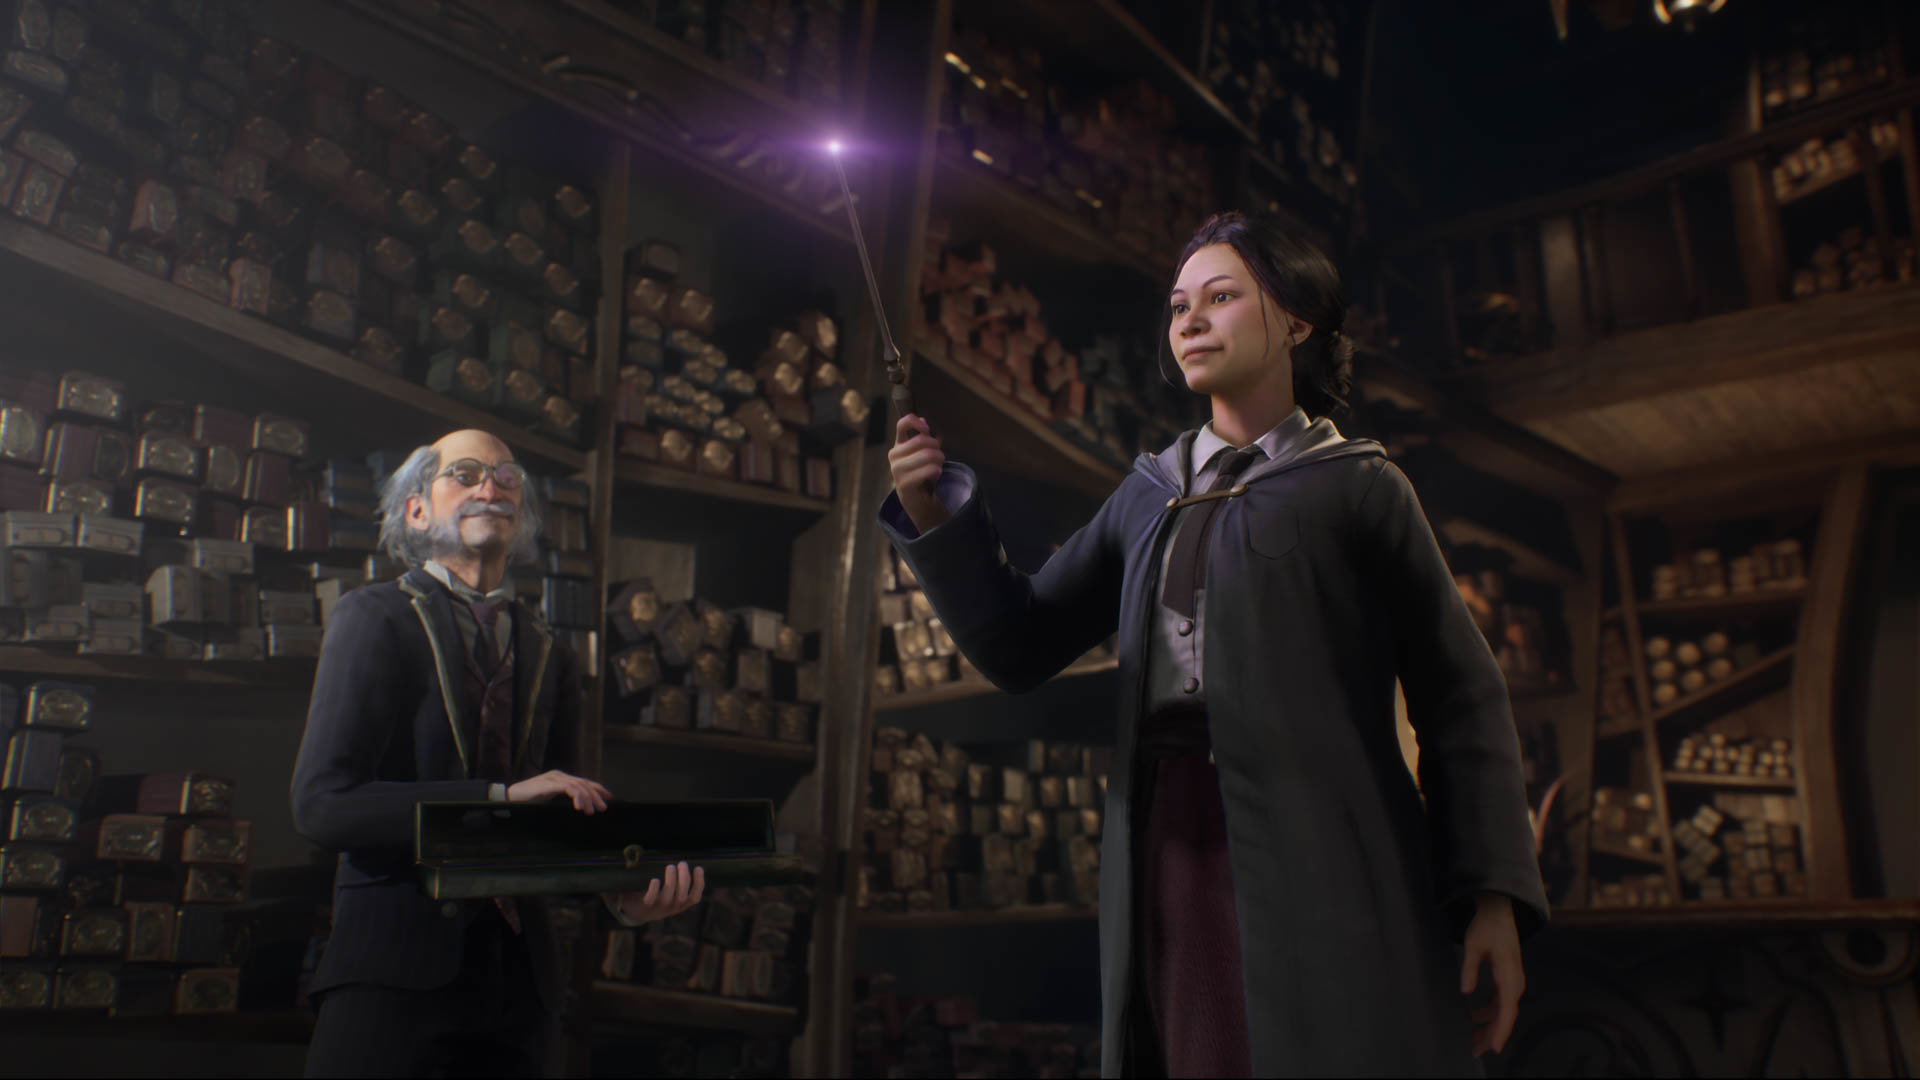 A young wizard casts &quot;Lumos&quot; from a newly acquired wand